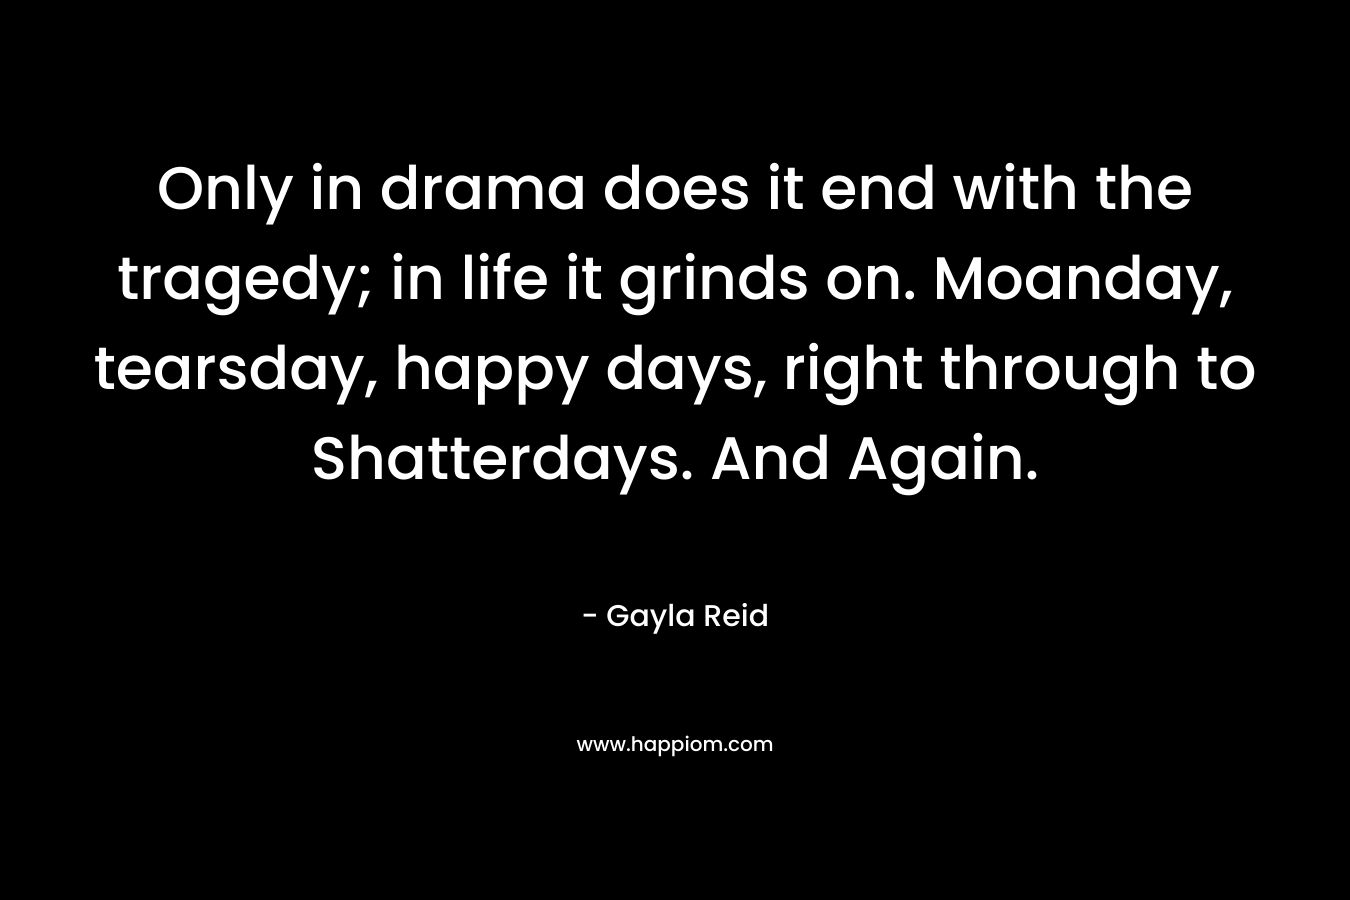 Only in drama does it end with the tragedy; in life it grinds on. Moanday, tearsday, happy days, right through to Shatterdays. And Again.